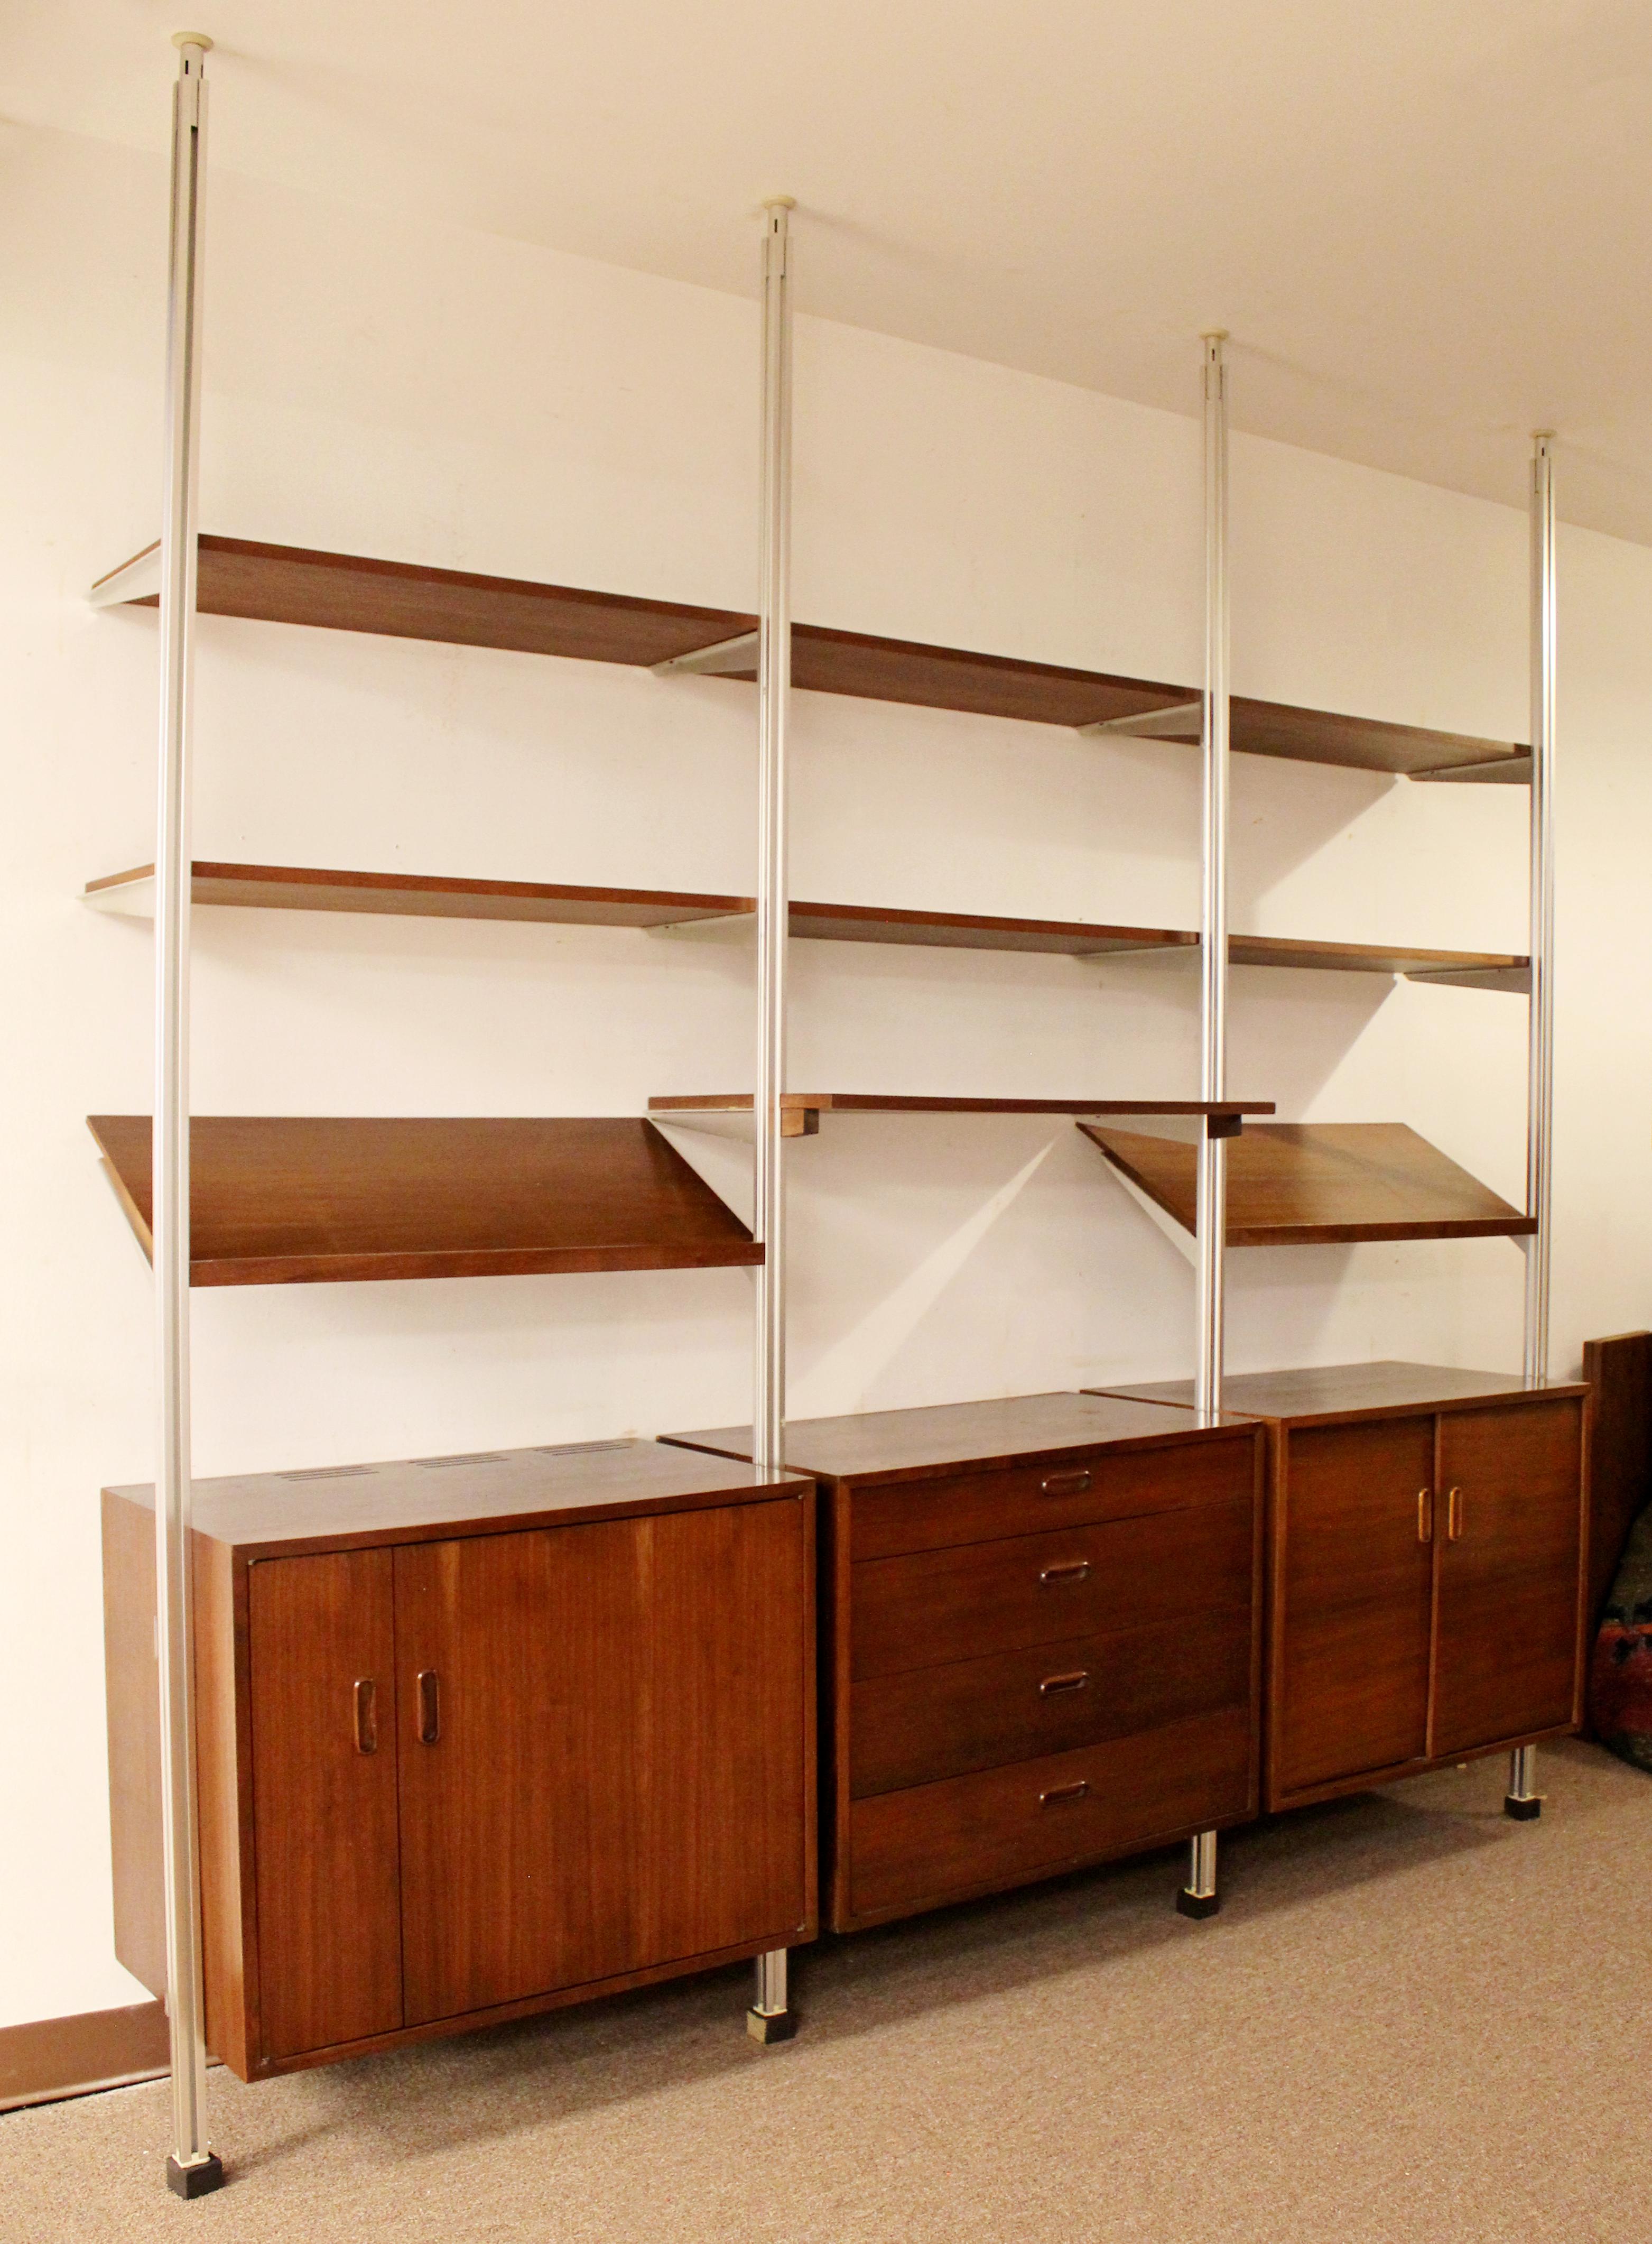 For your consideration is a fantastic, walnut wood, three bay bookcase wall omni unit, with four drawers, by George Nelson, circa the 1960s. In very good condition. The dimensions are 97.5